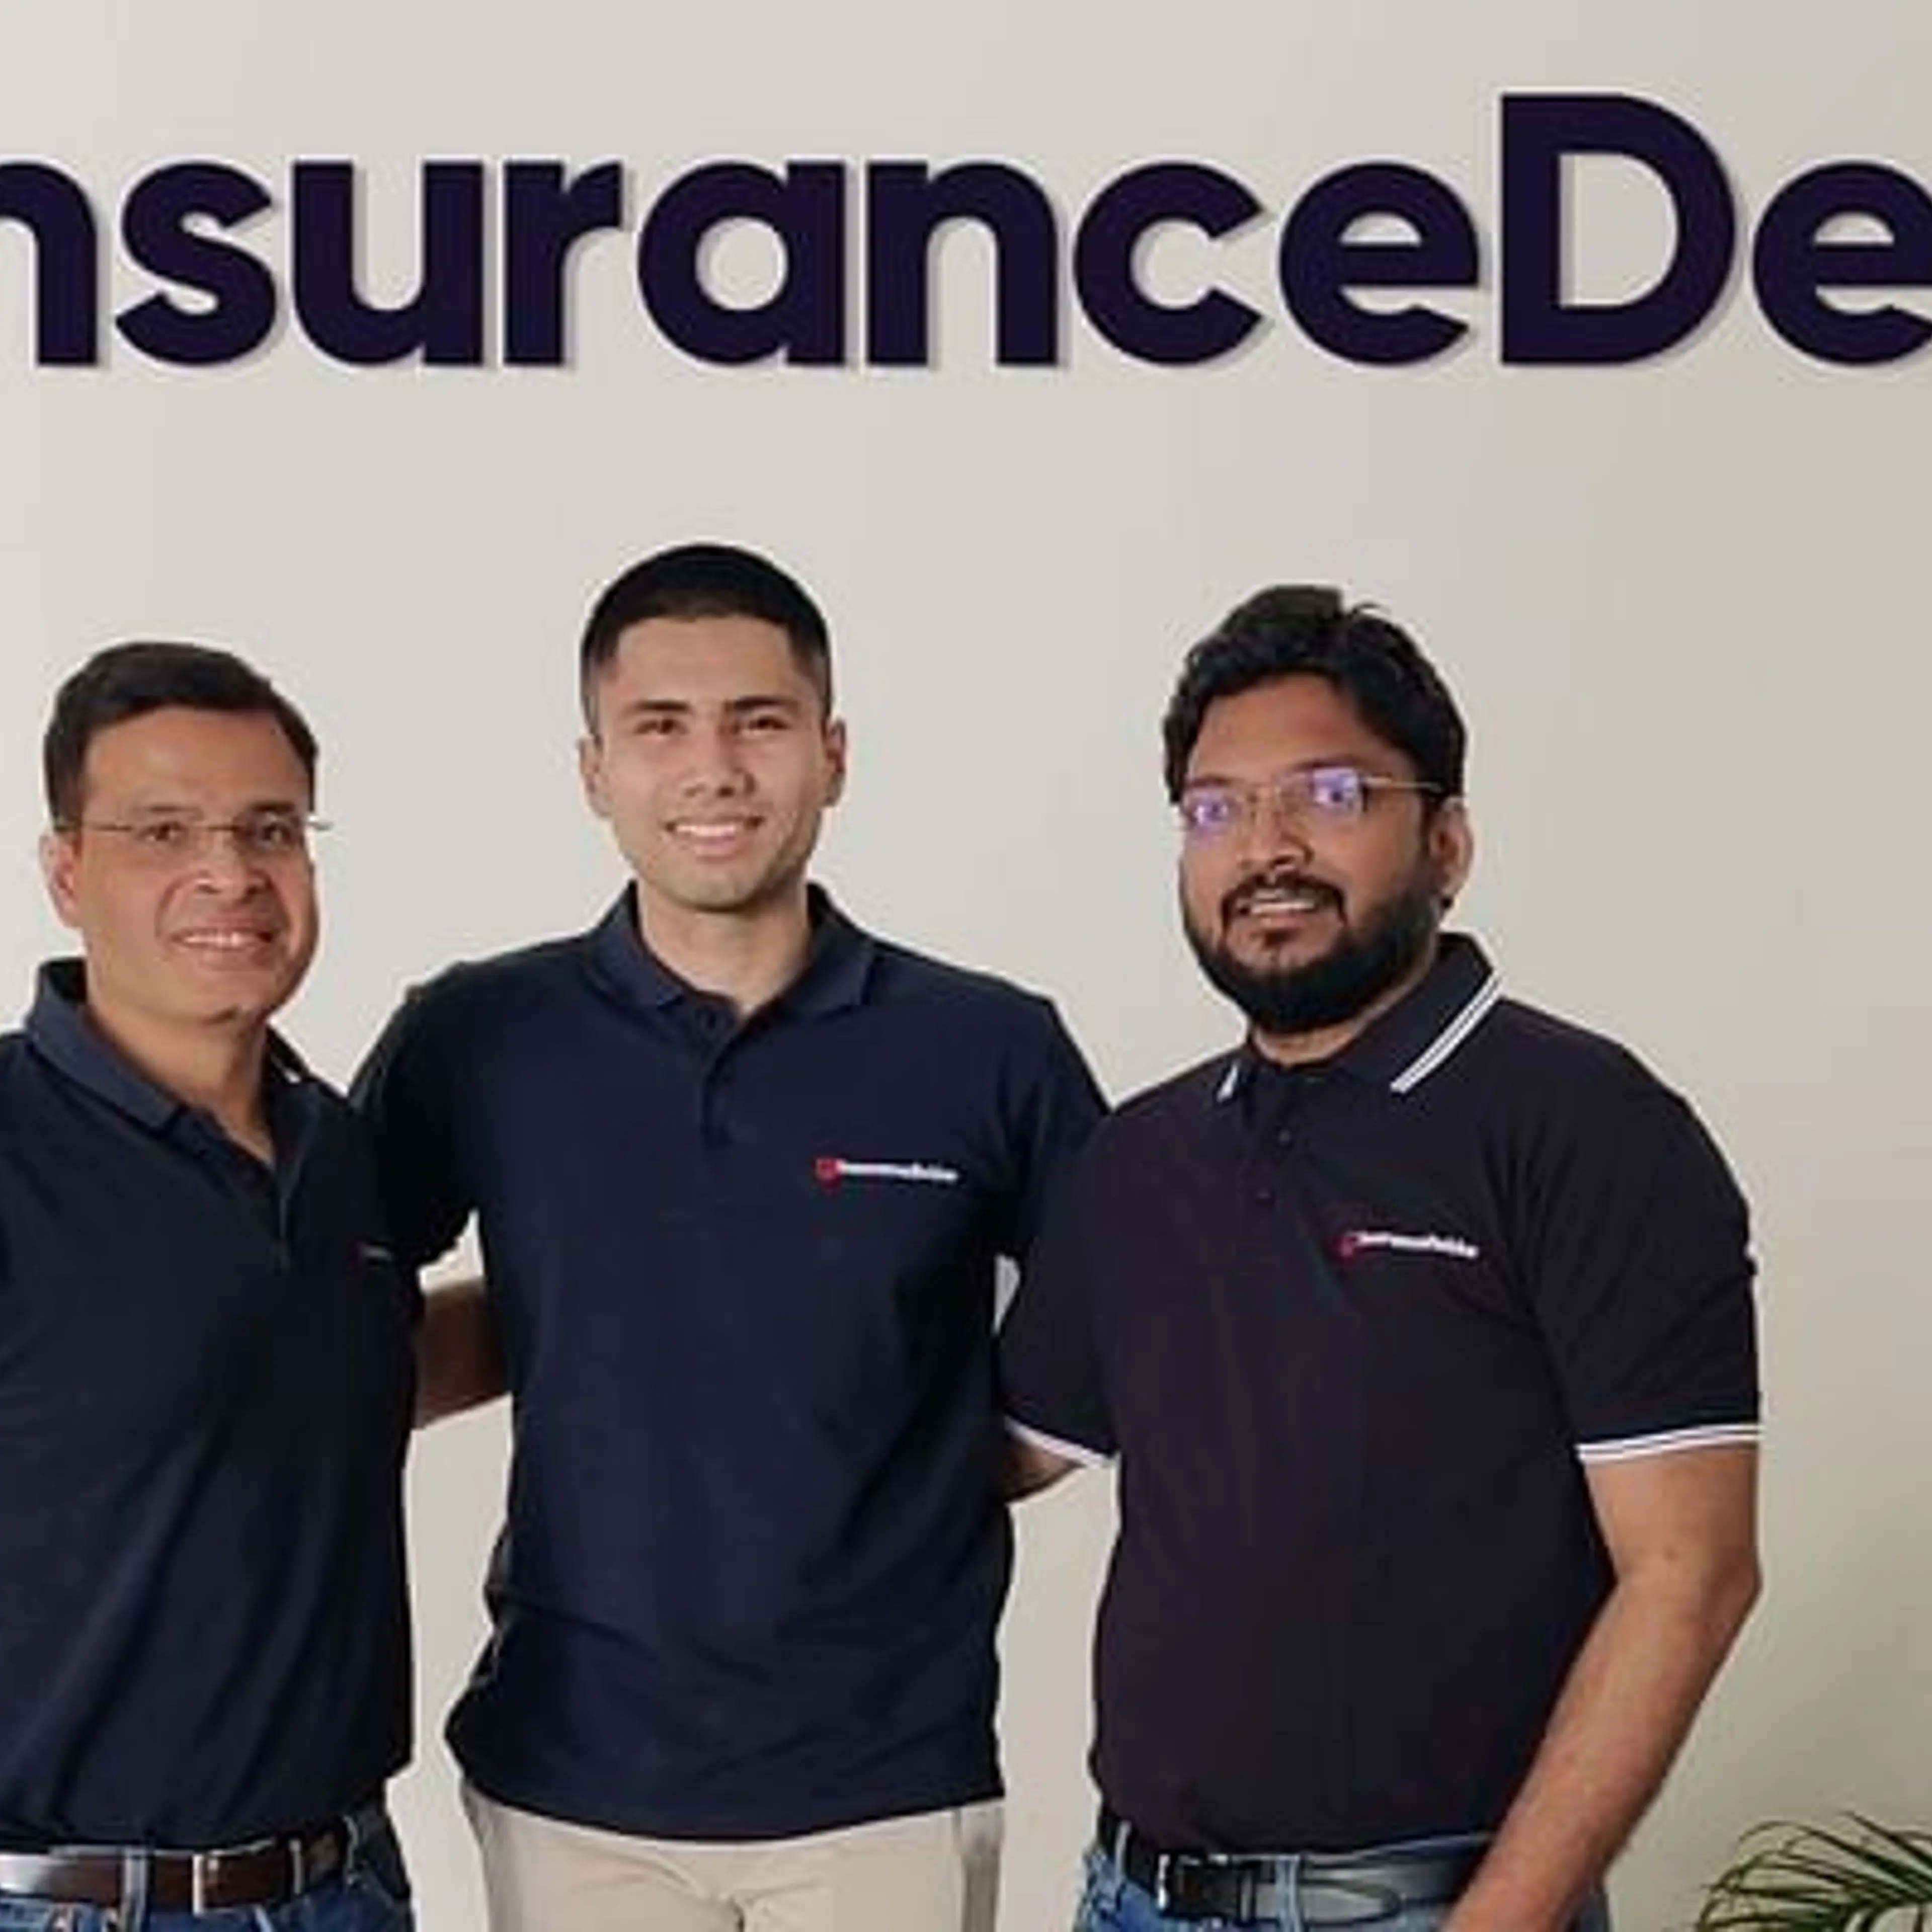 InsuranceDekho acquires Verak to expand presence in SME insurance space